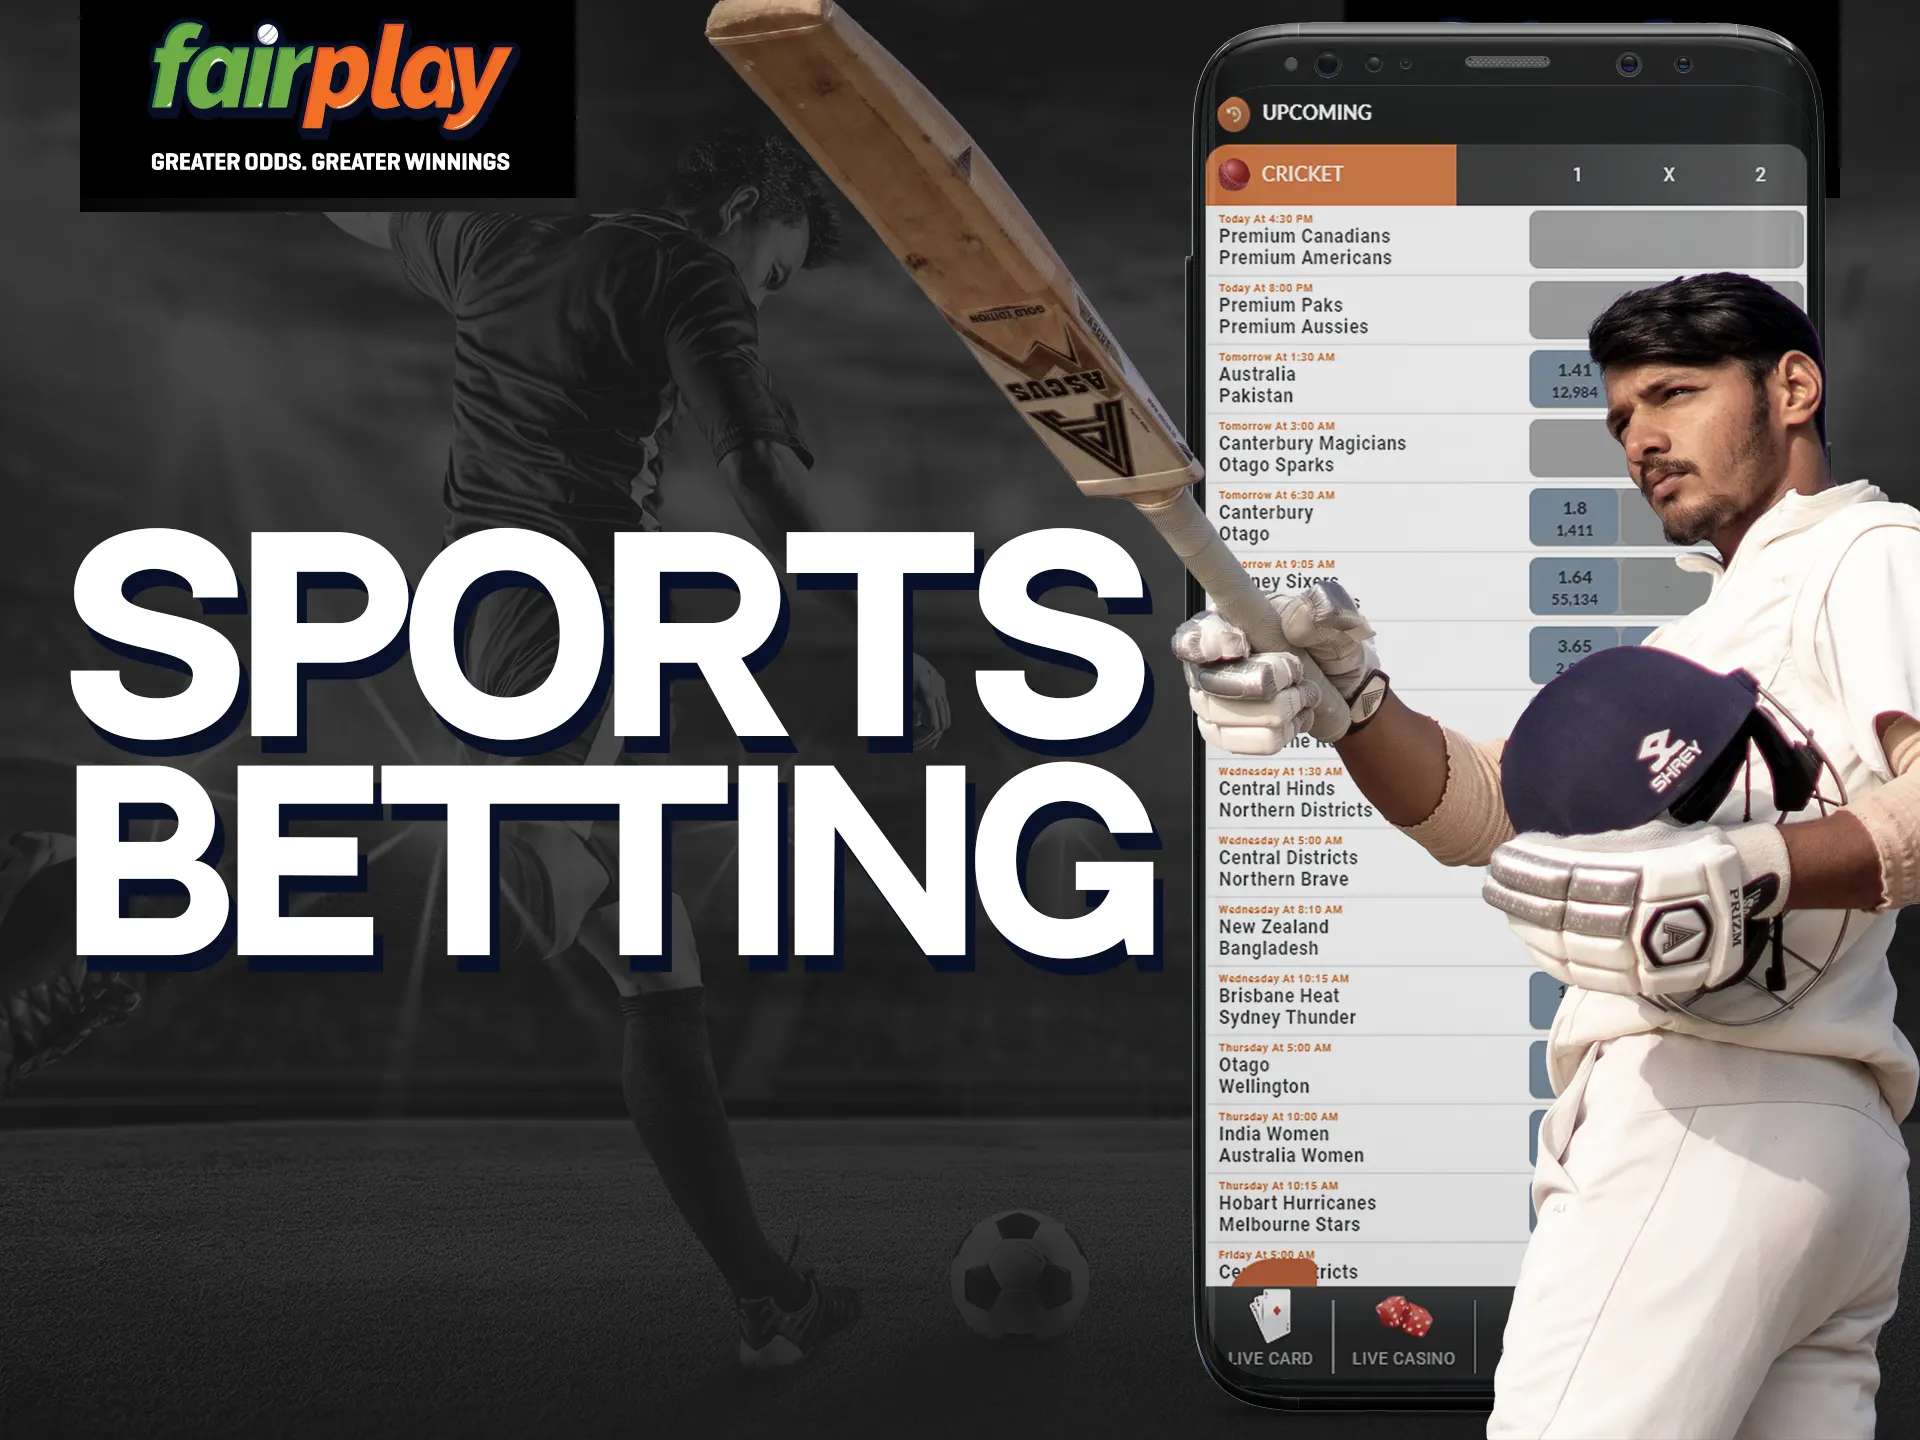 Enjoy a great number of sports betting at Fairplay.